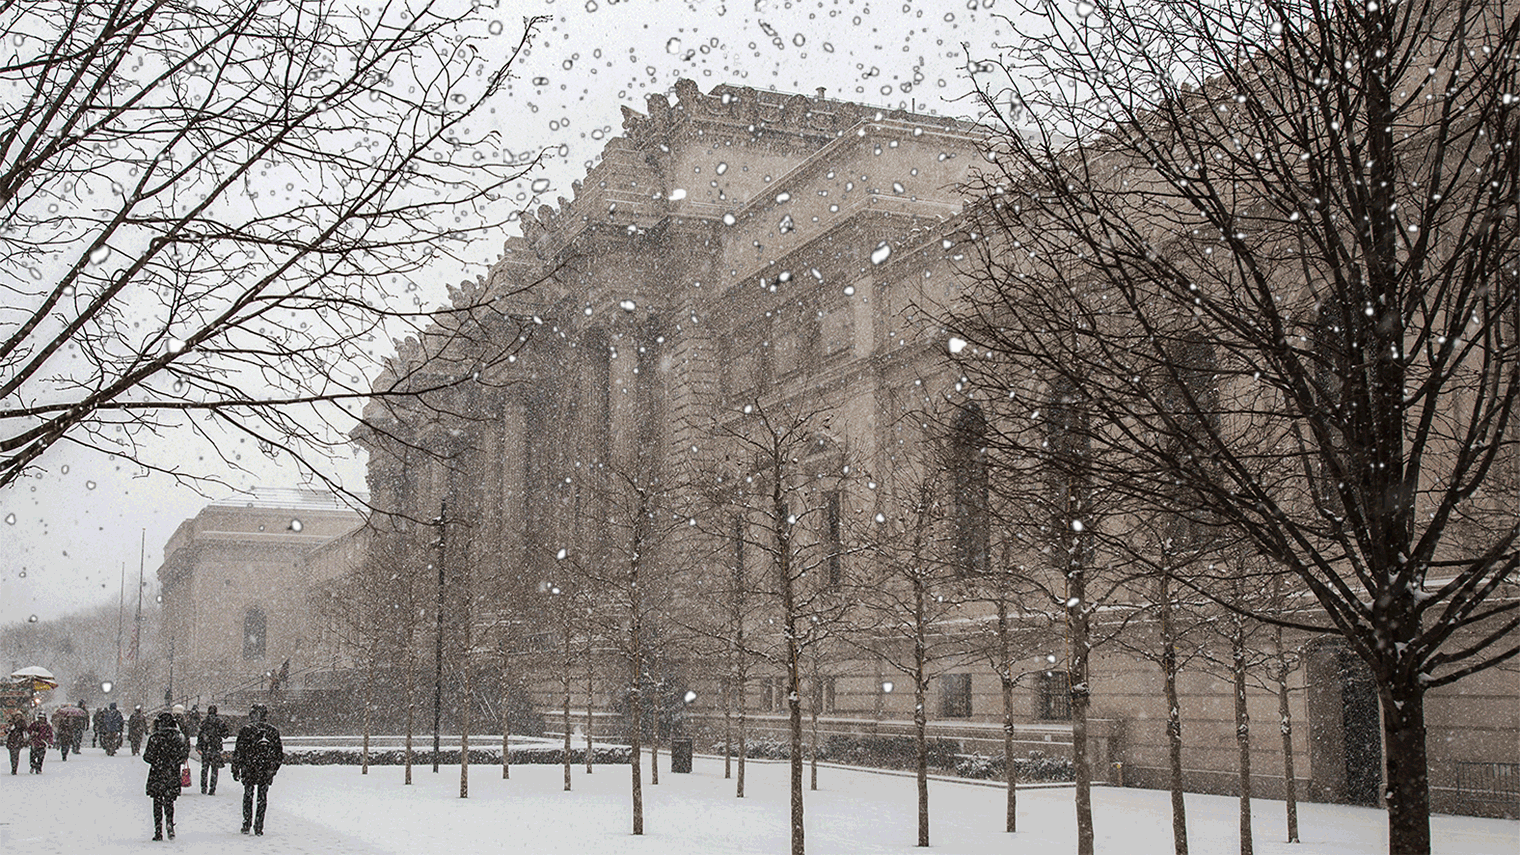 Picture of The Met during winter with animation of snow falling and bare trees.